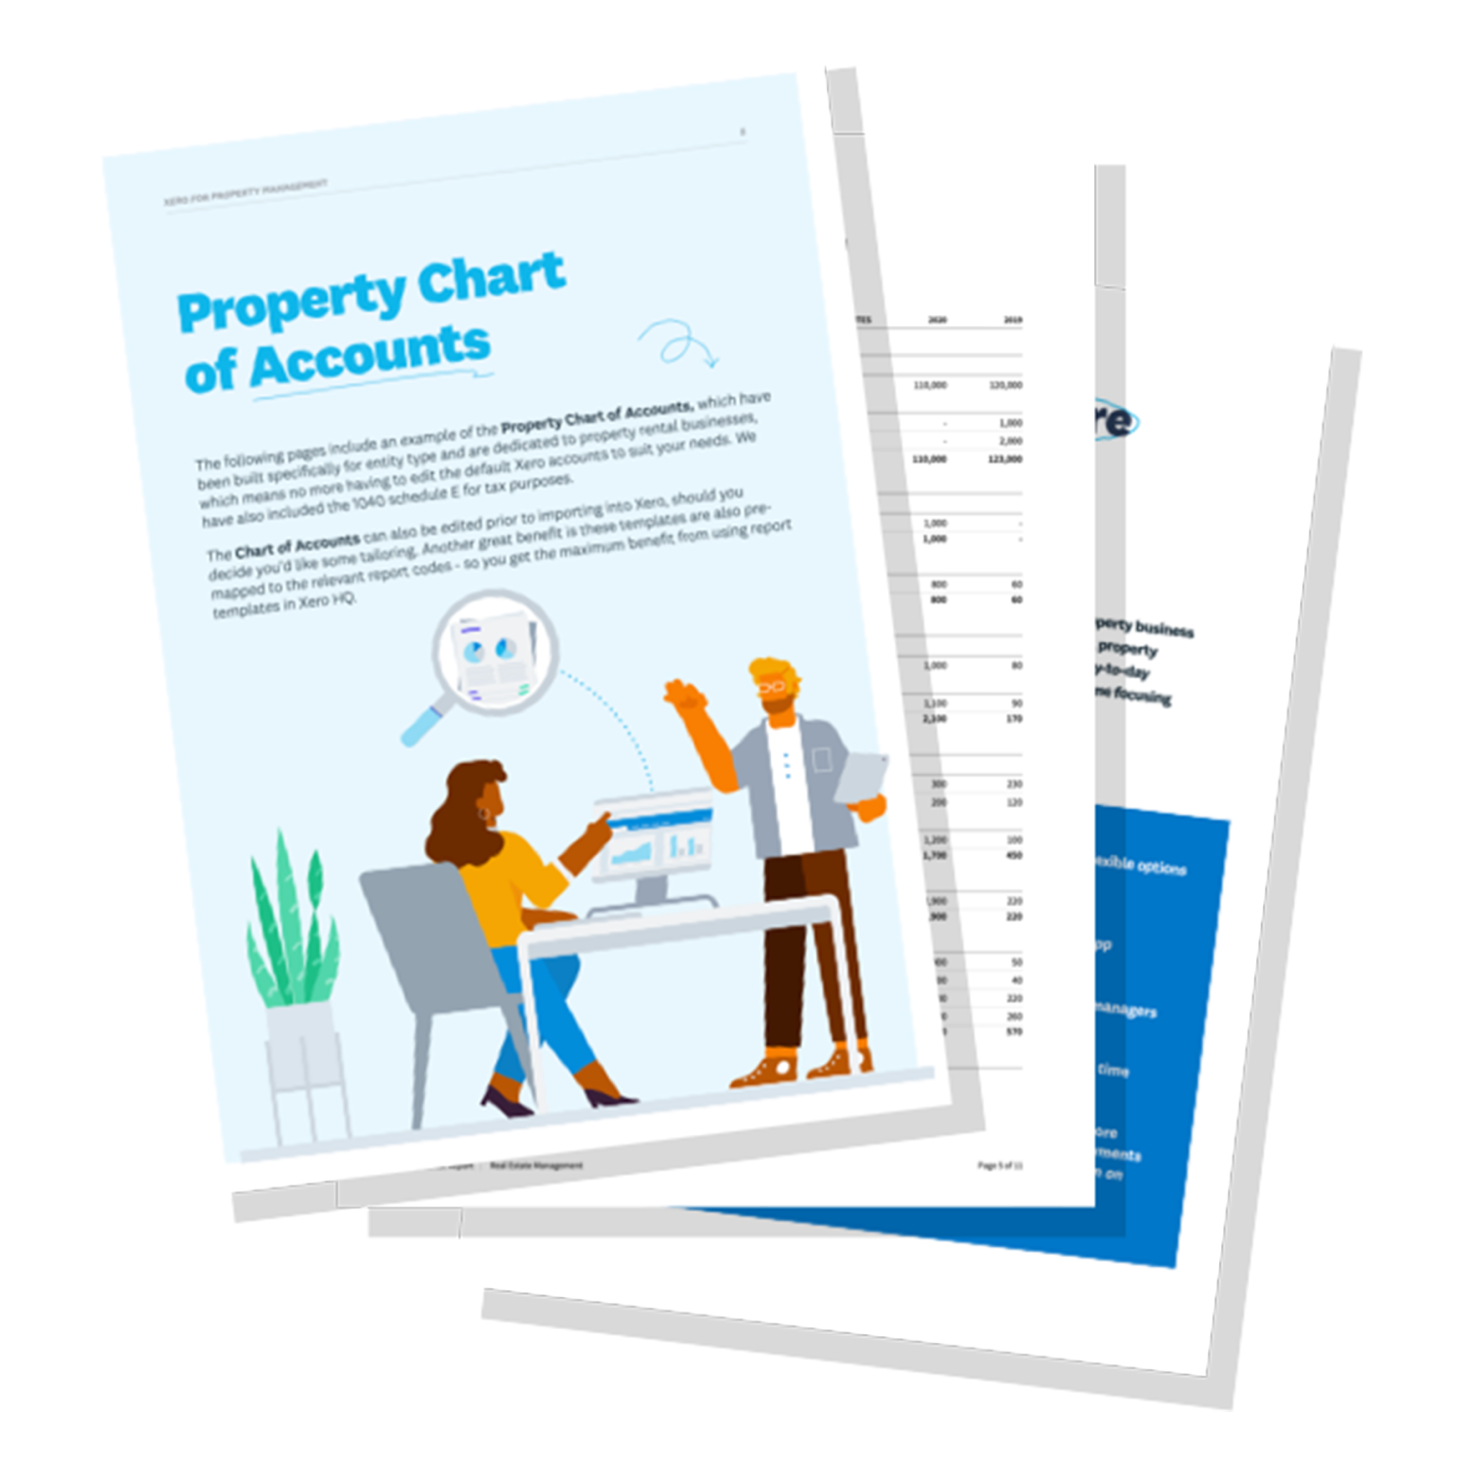 The Xero for landlords resource pack including a property chart of accounts and playbook.